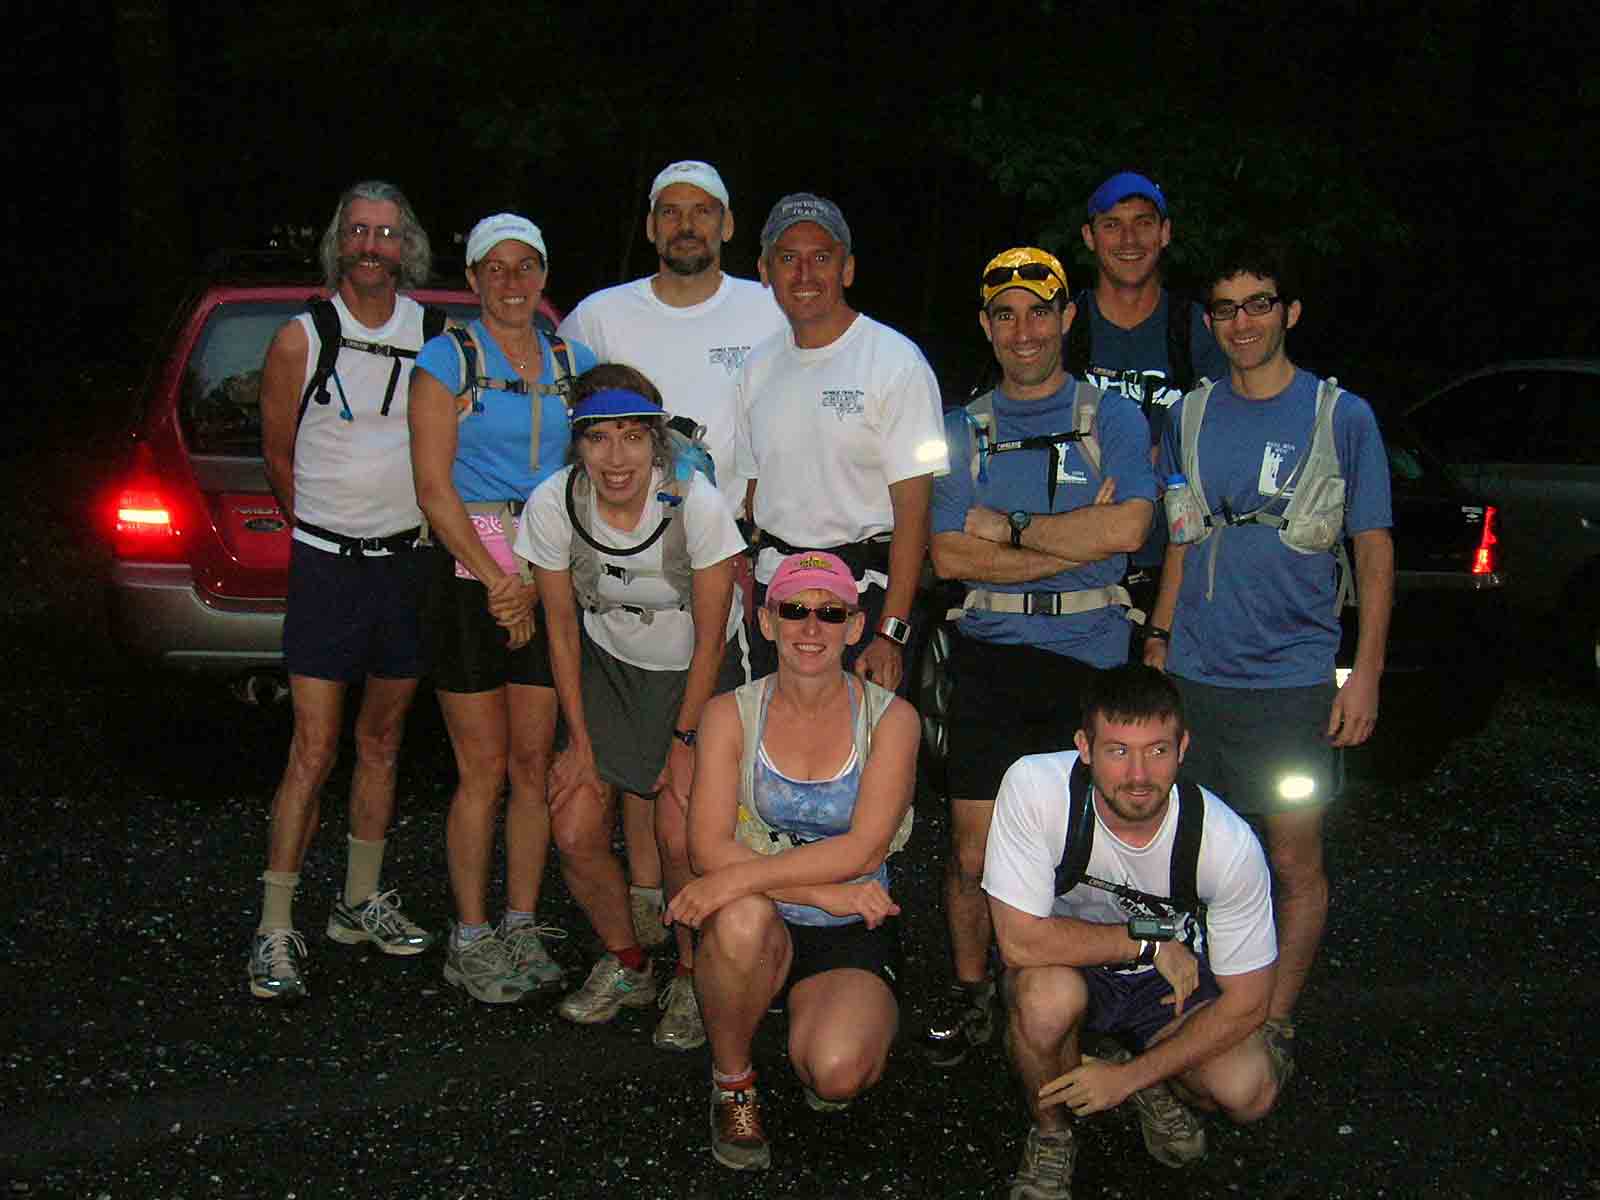 10 of the 11 starters line up for obligatory class photo prior to the start of the inaugural Martha Moats Baker Memorial 50K, June 21 2008